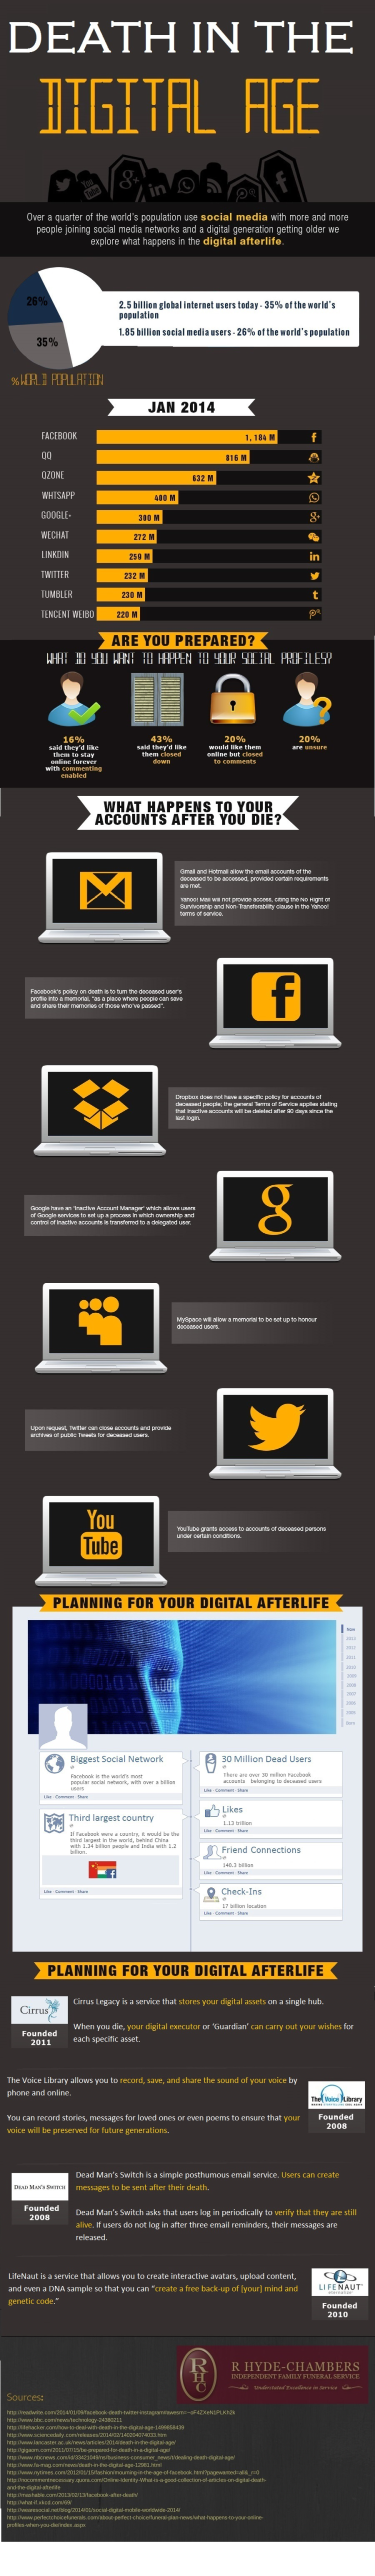 Death in the Digital Age [Infographic]